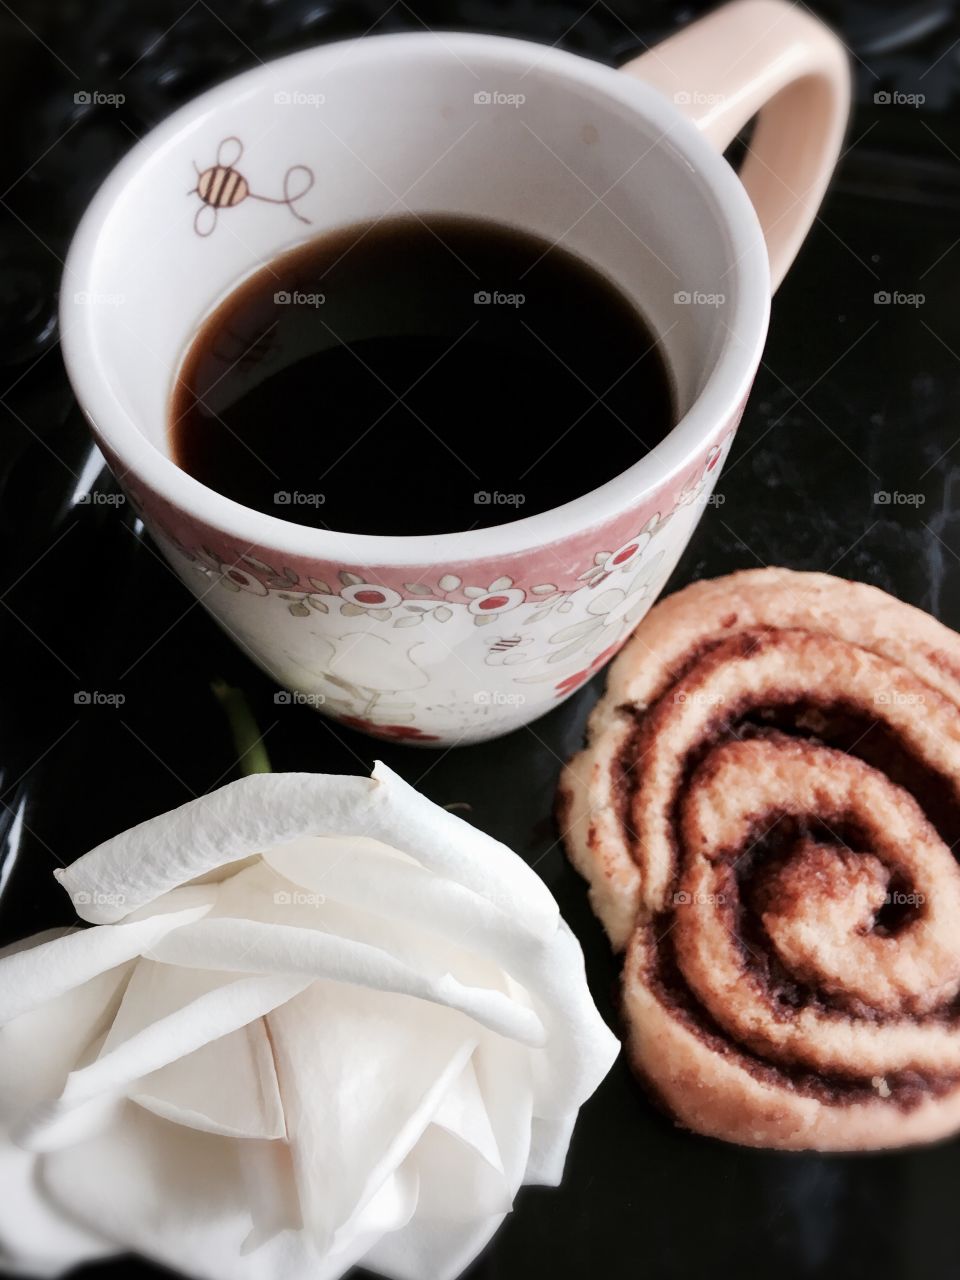 Black coffee, white rose, cinnamon roll. On black tray for breakfast in bed. 